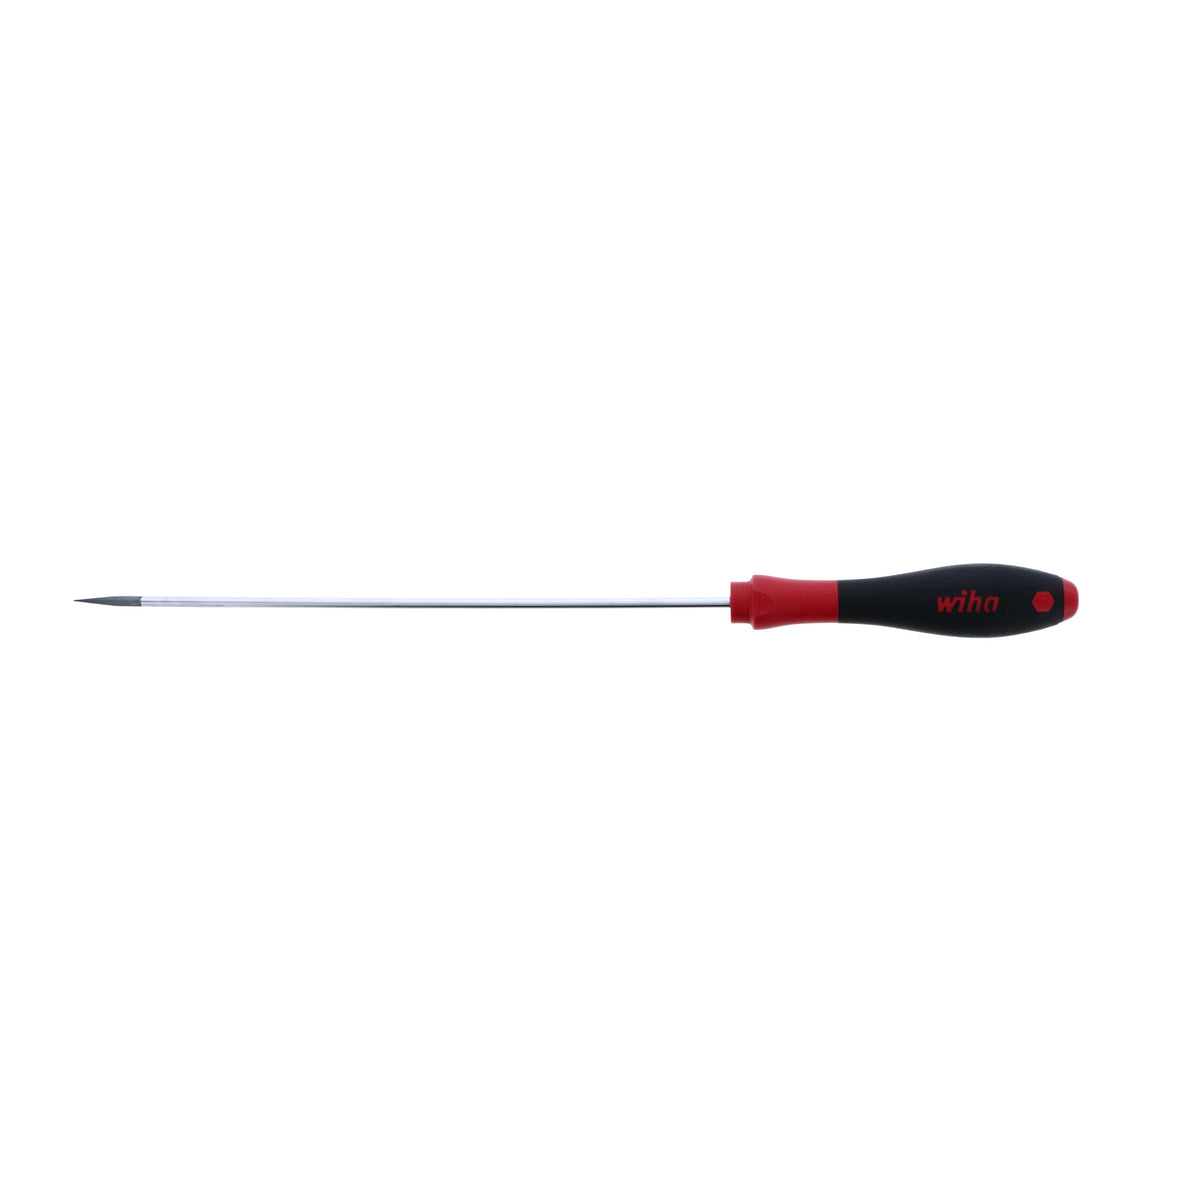 Wiha 30212 SoftFinish® Slotted Screwdriver 3.5mm Made in Germany